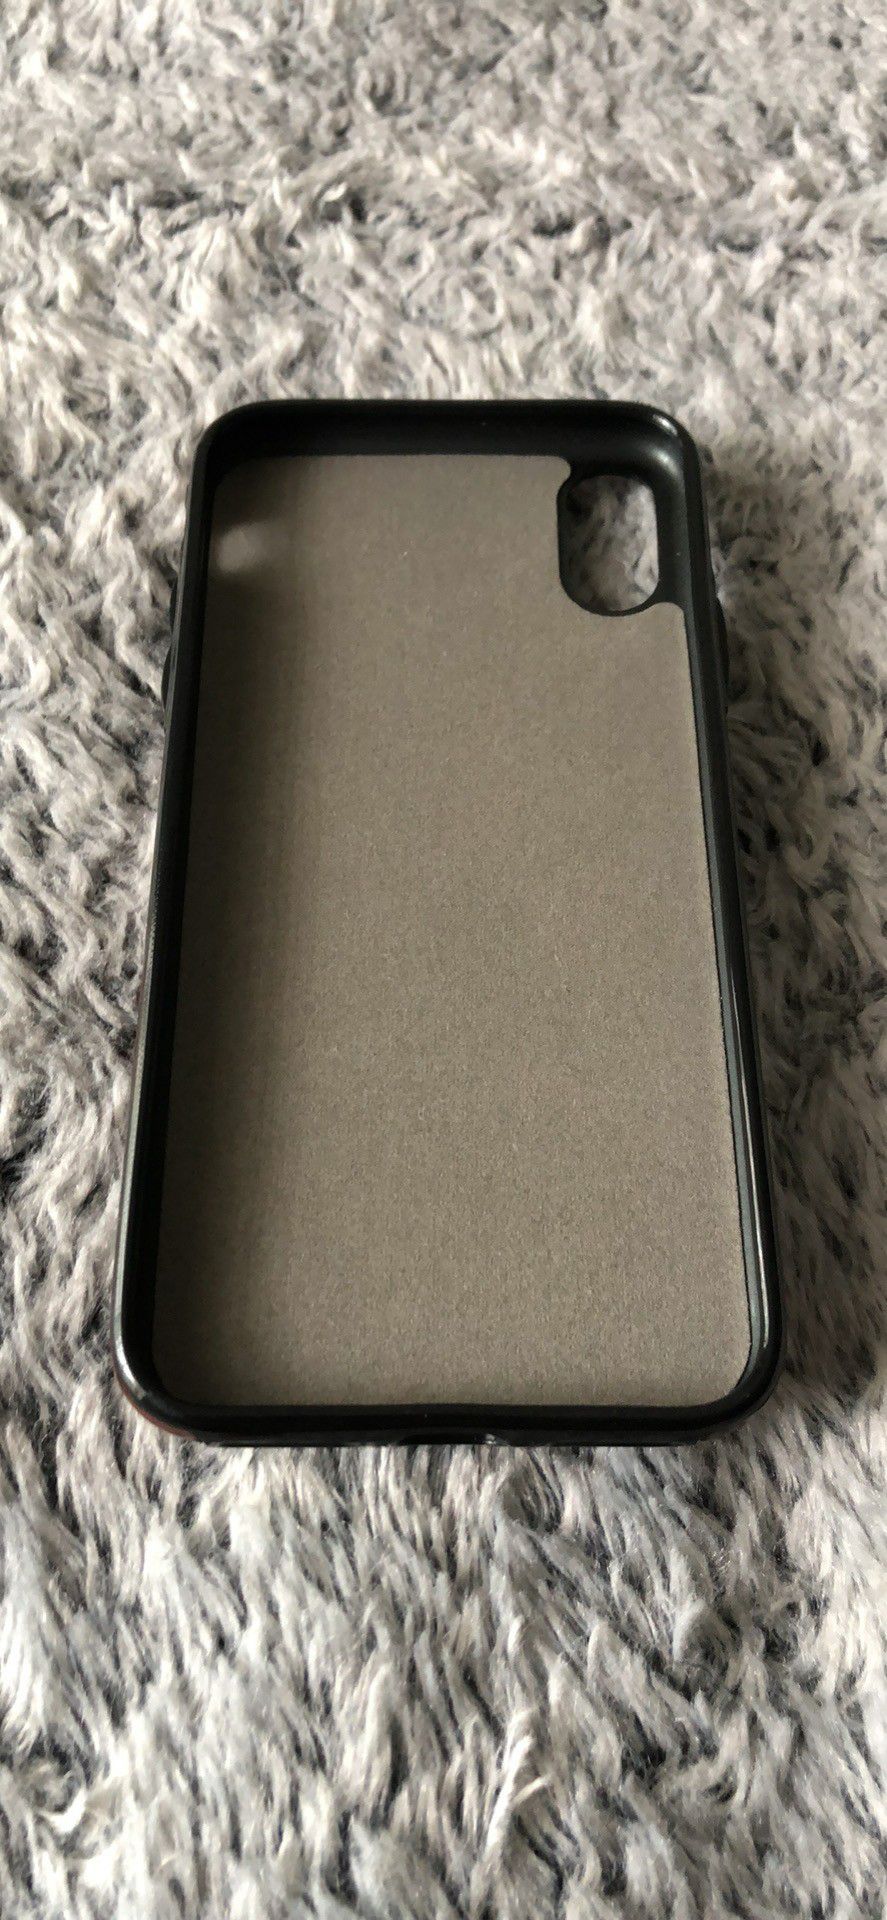 iPhone X and 2 cases for sale